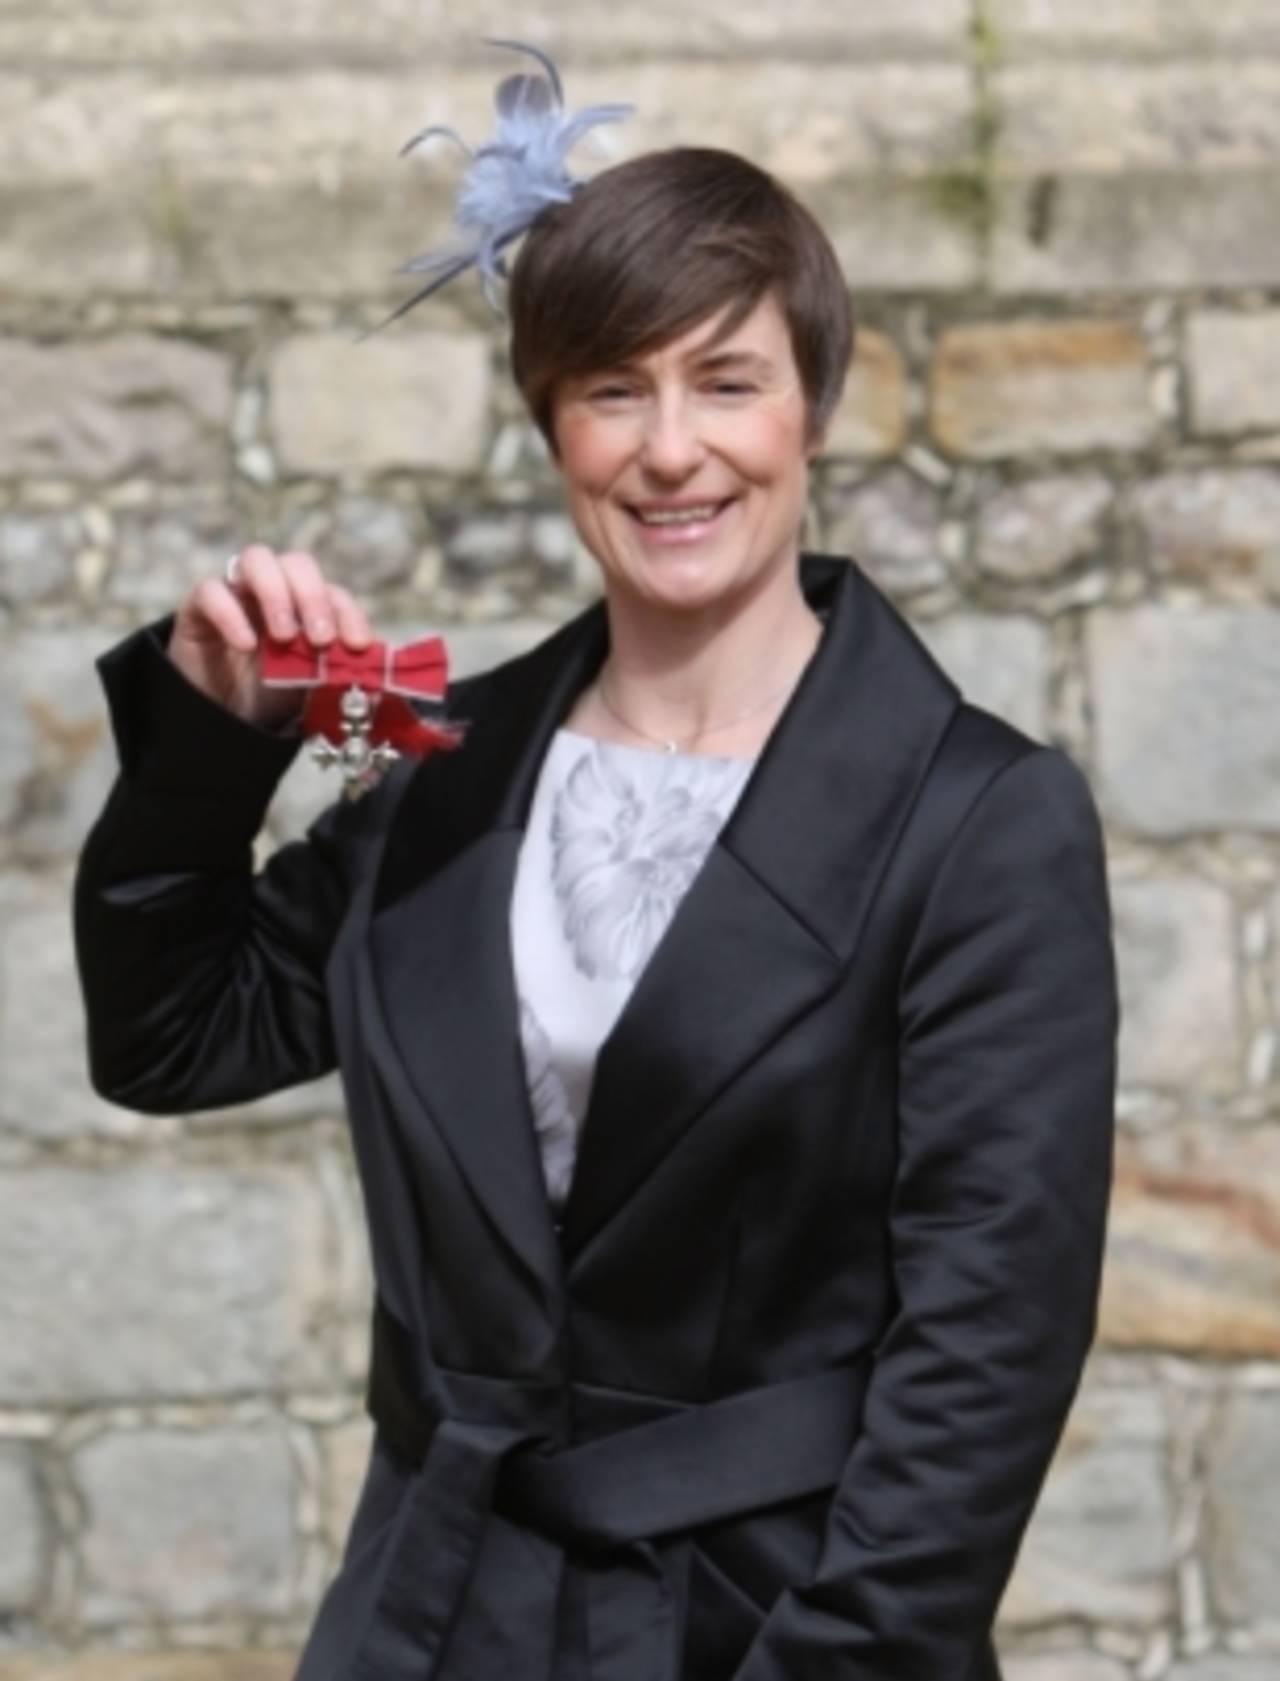 England cricketer Claire Taylor poses with her MBE, February 26, 2010